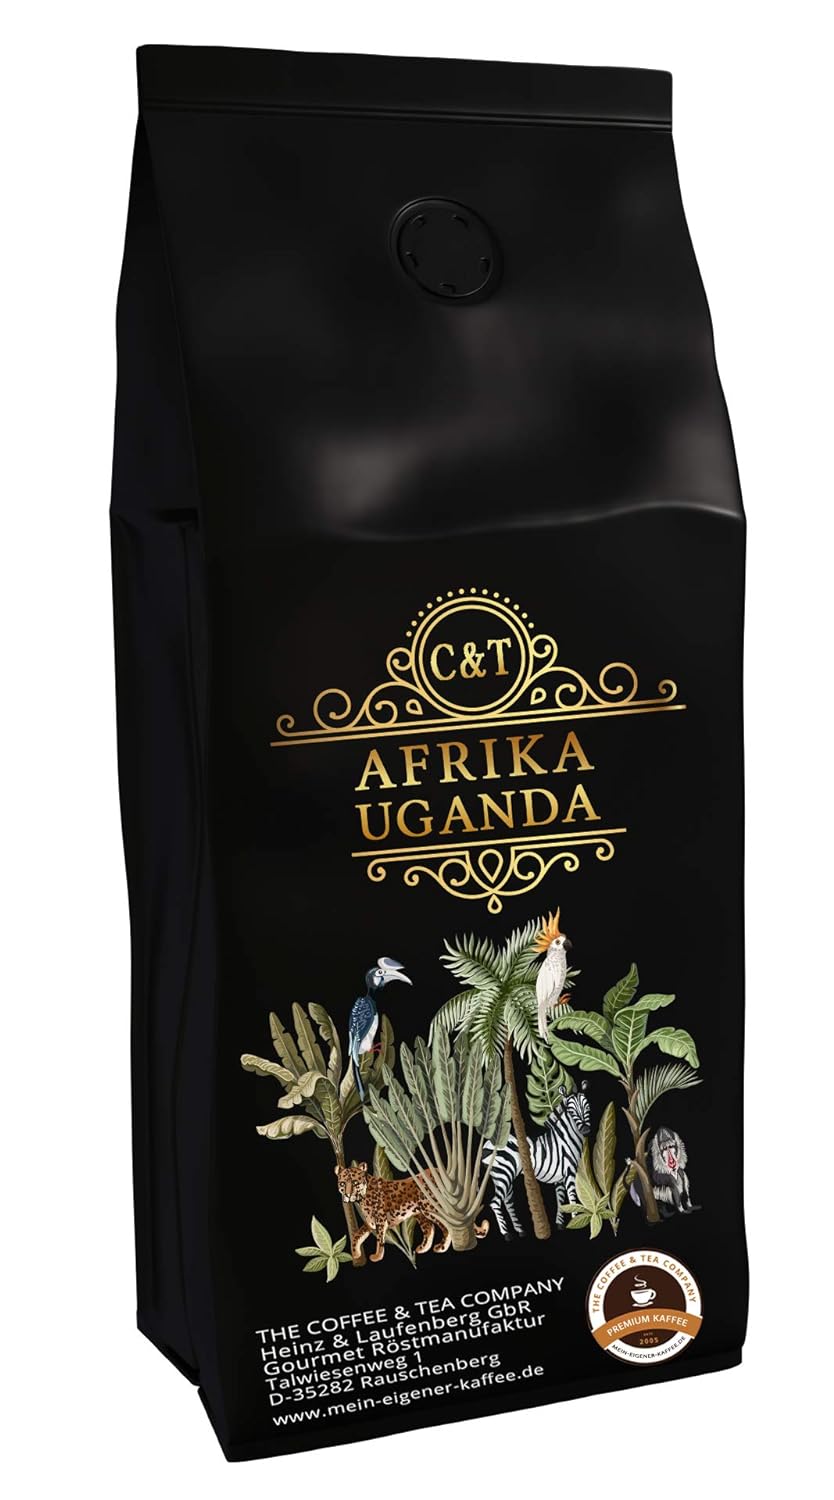 Coffee Specialty from Africa - Uganda in Eastern Central Africa (200 g, Whole Bean) - Country Coffee - Top Coffee - Low Acid - Gentle and Freshly Roasted